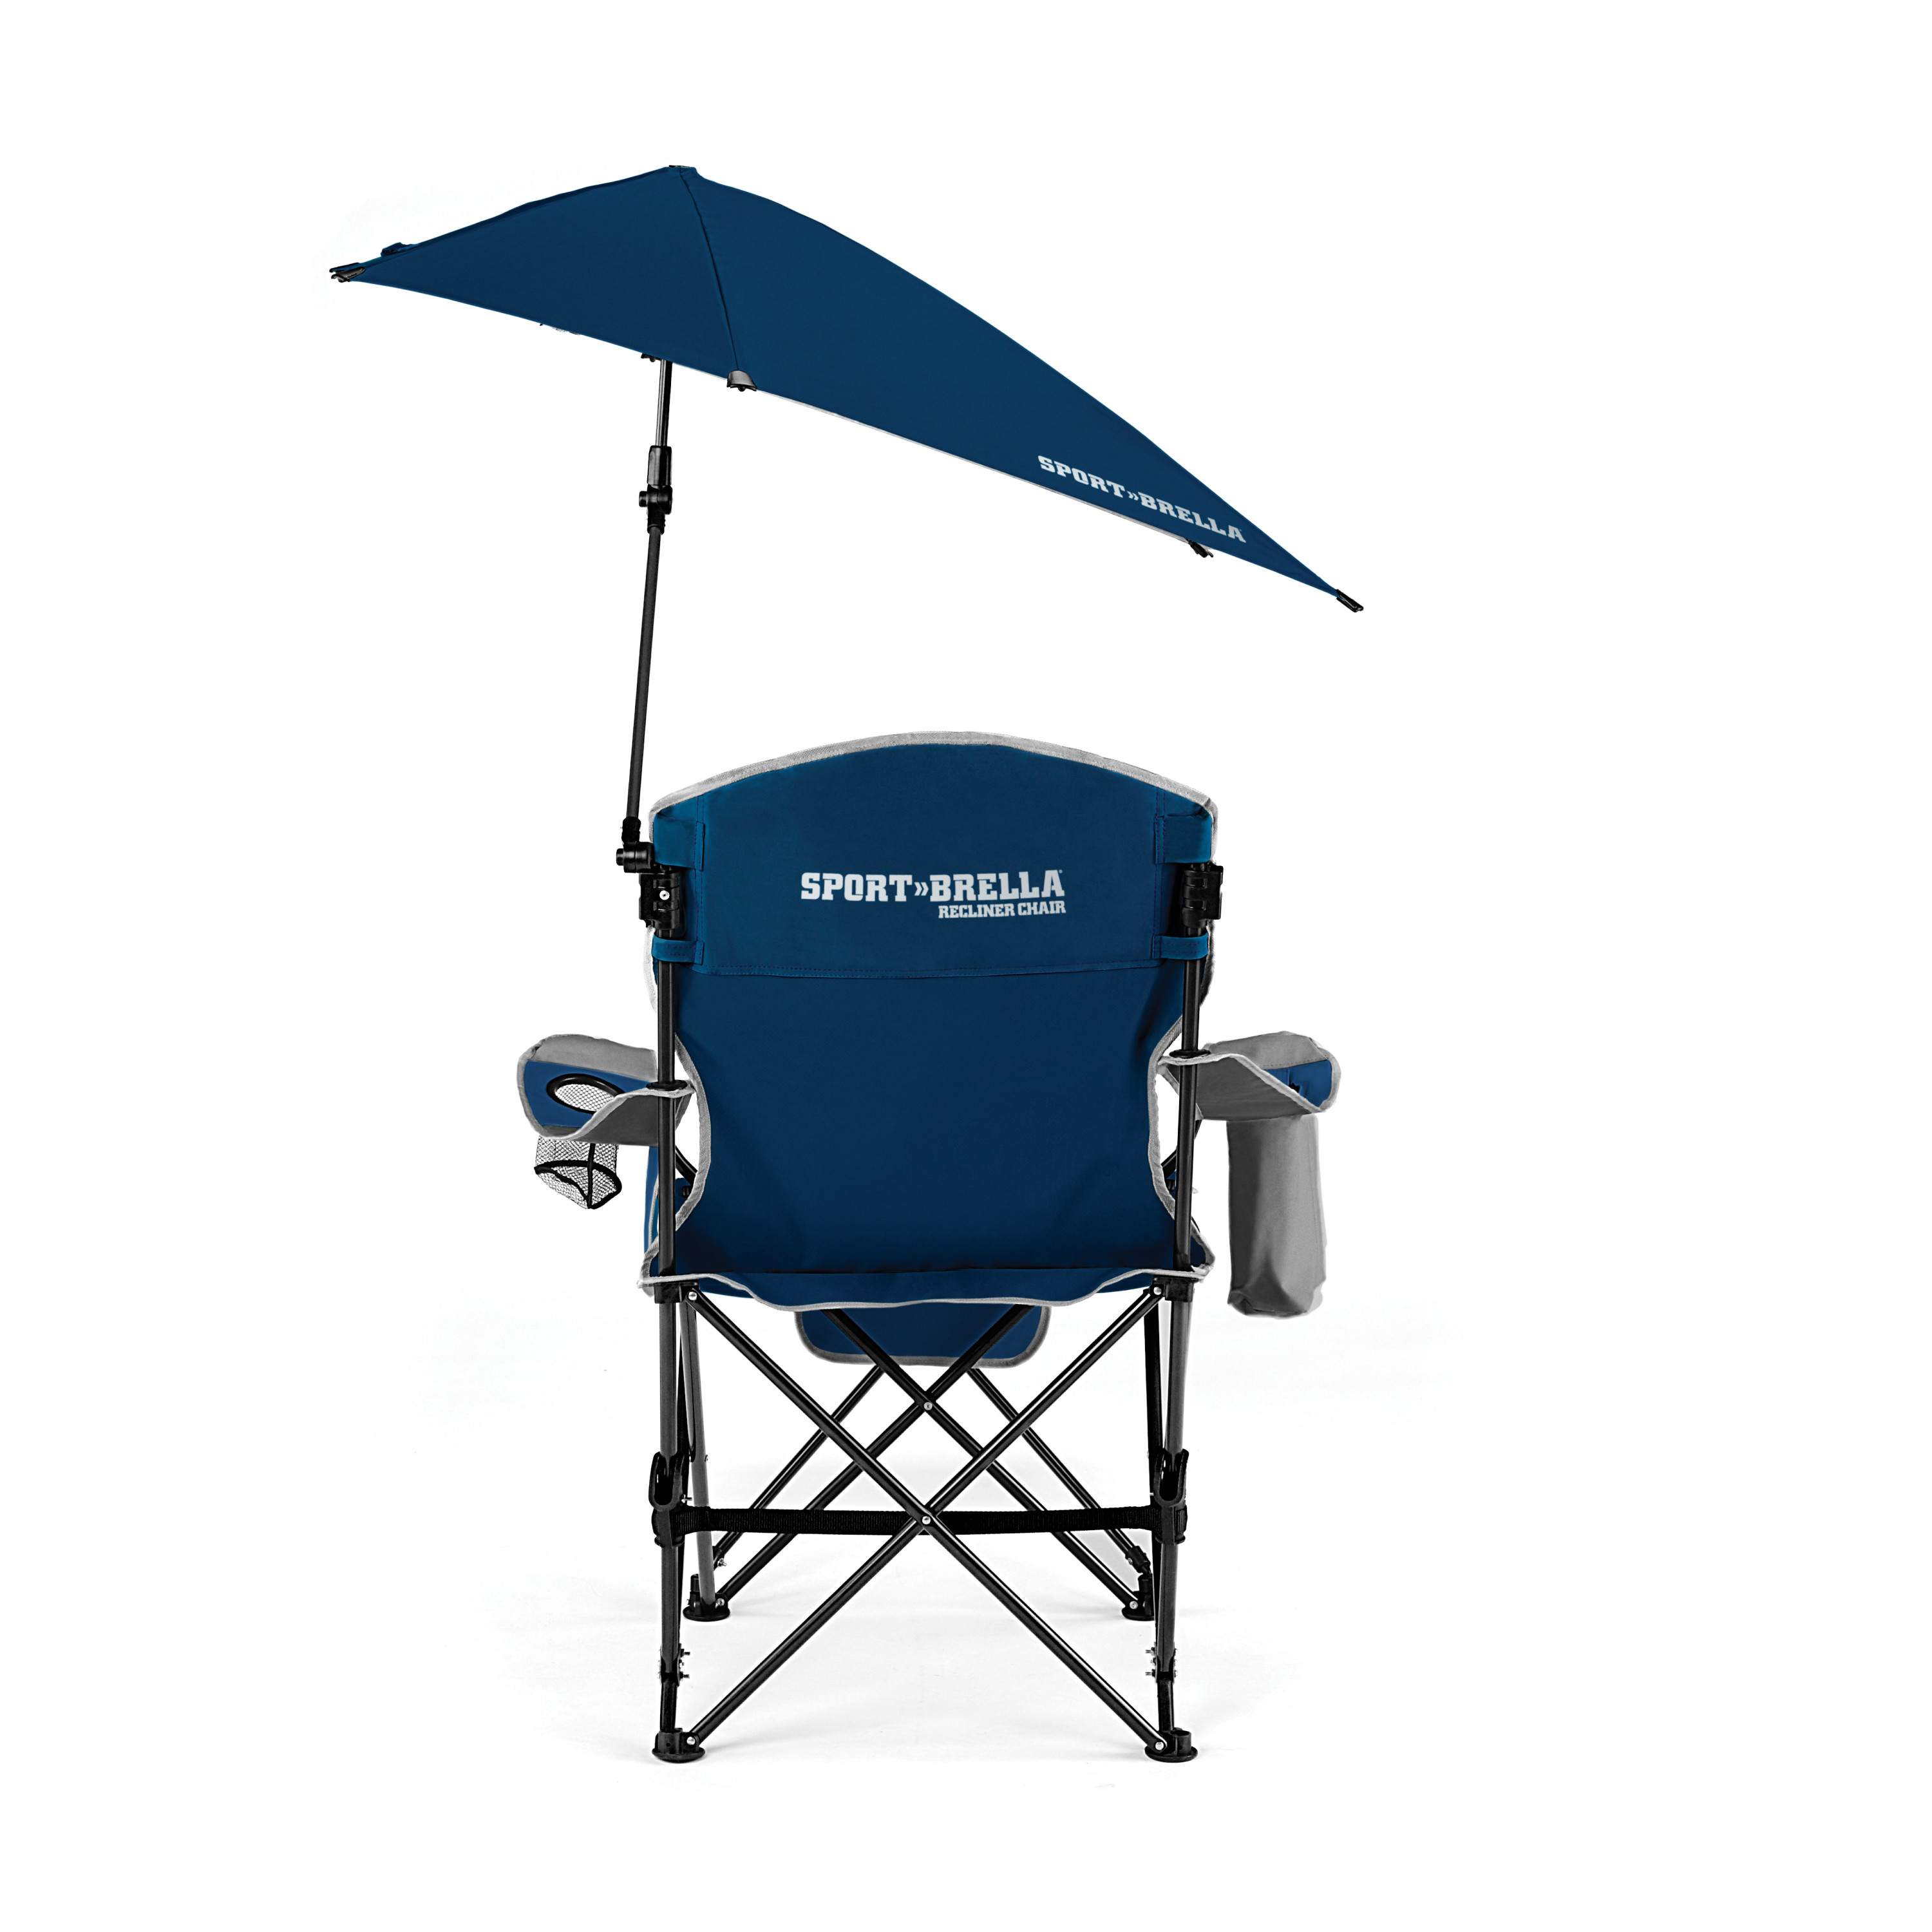 Sport-Brella Blue Camping Chair, with Clamp-On Sun Shade - image 4 of 8